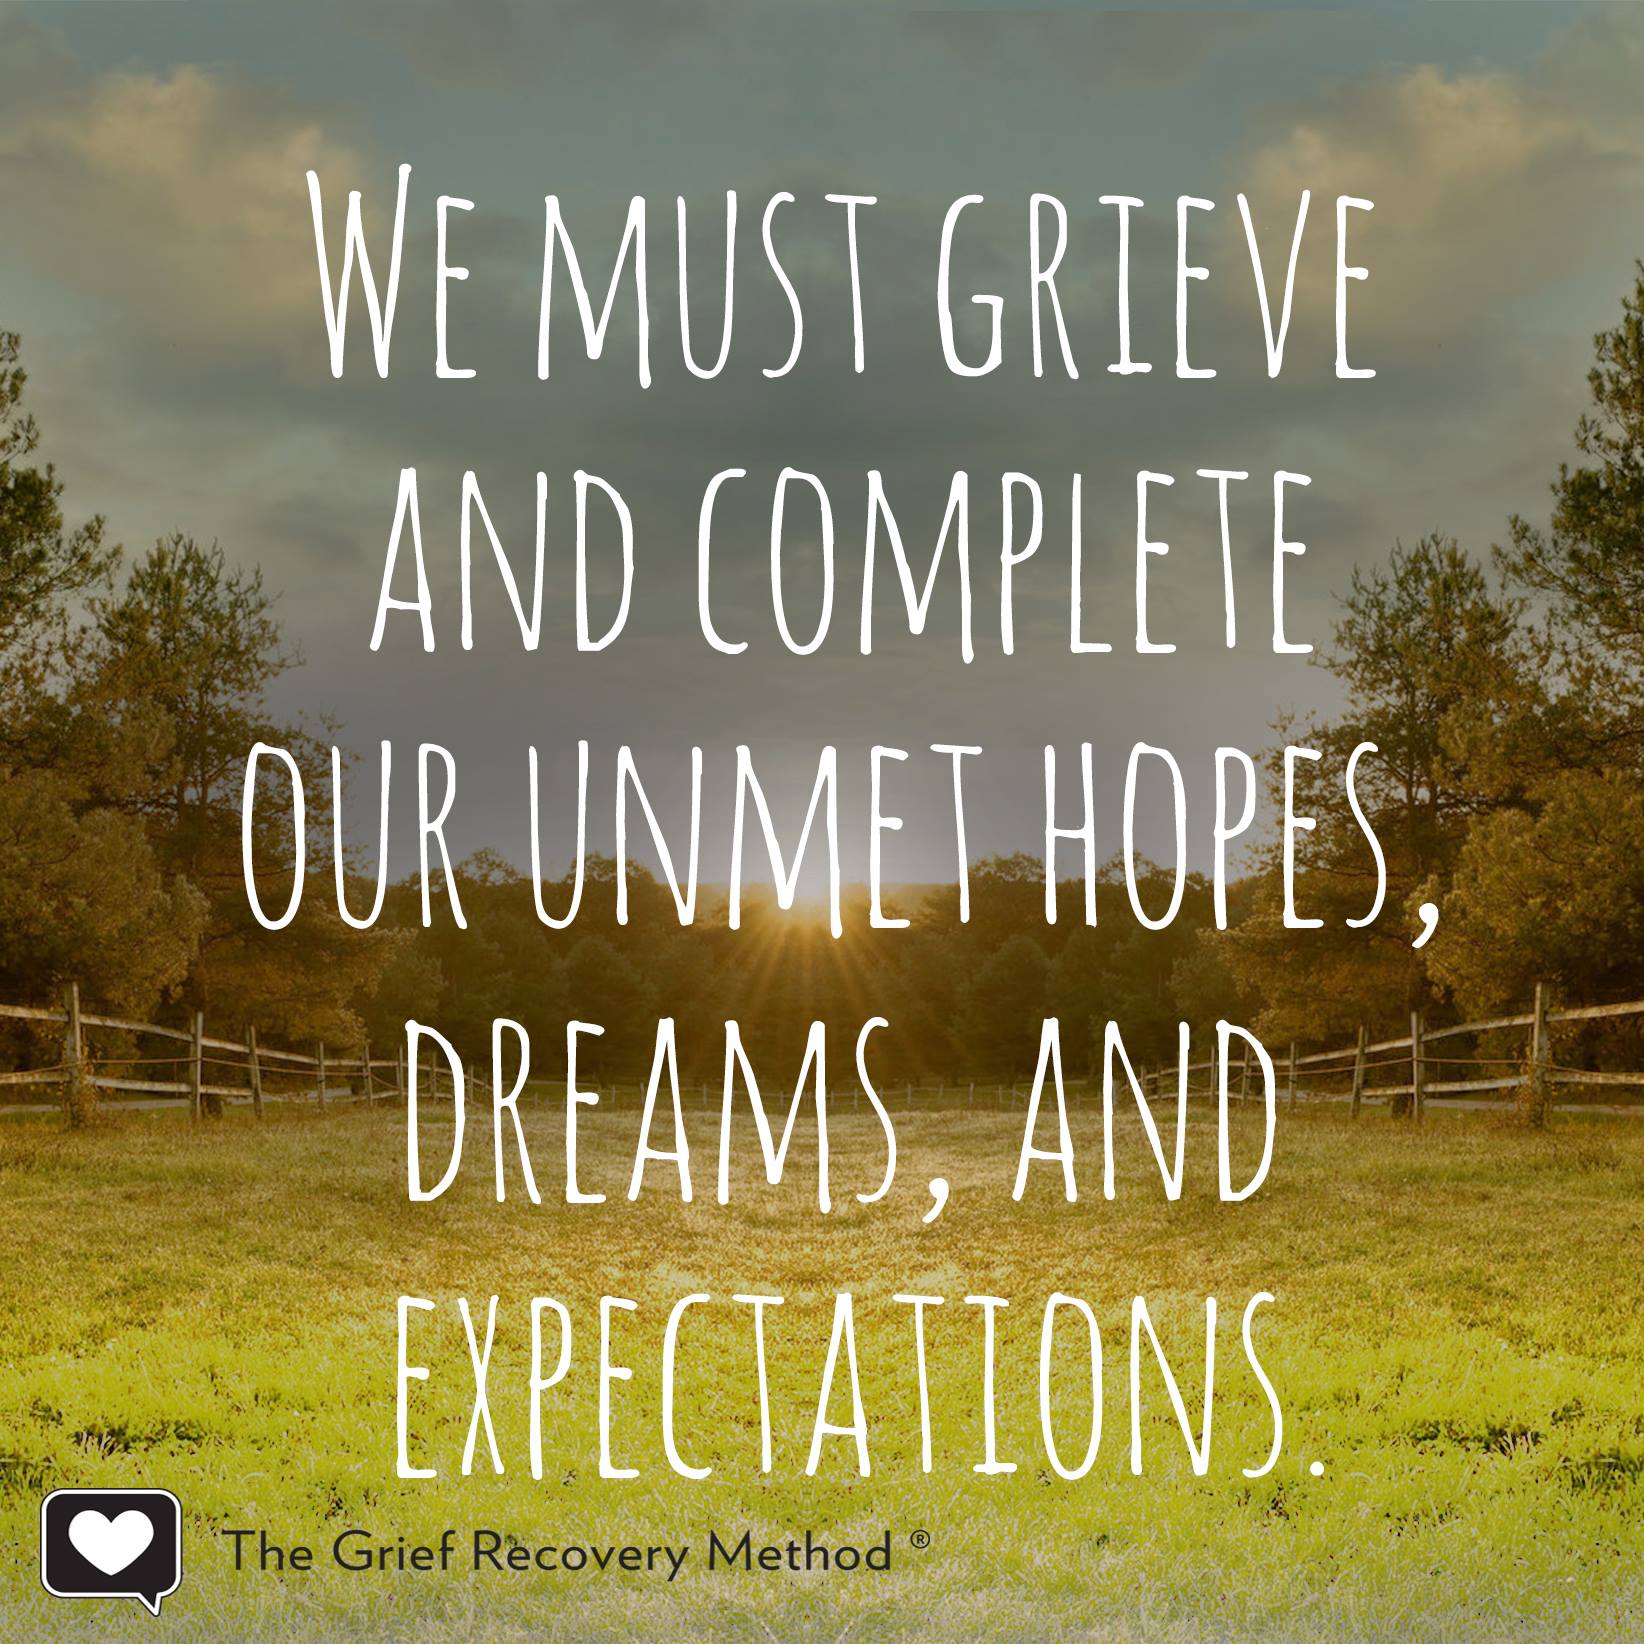 grieve and complete unmet hopes dreams expectations.jpg